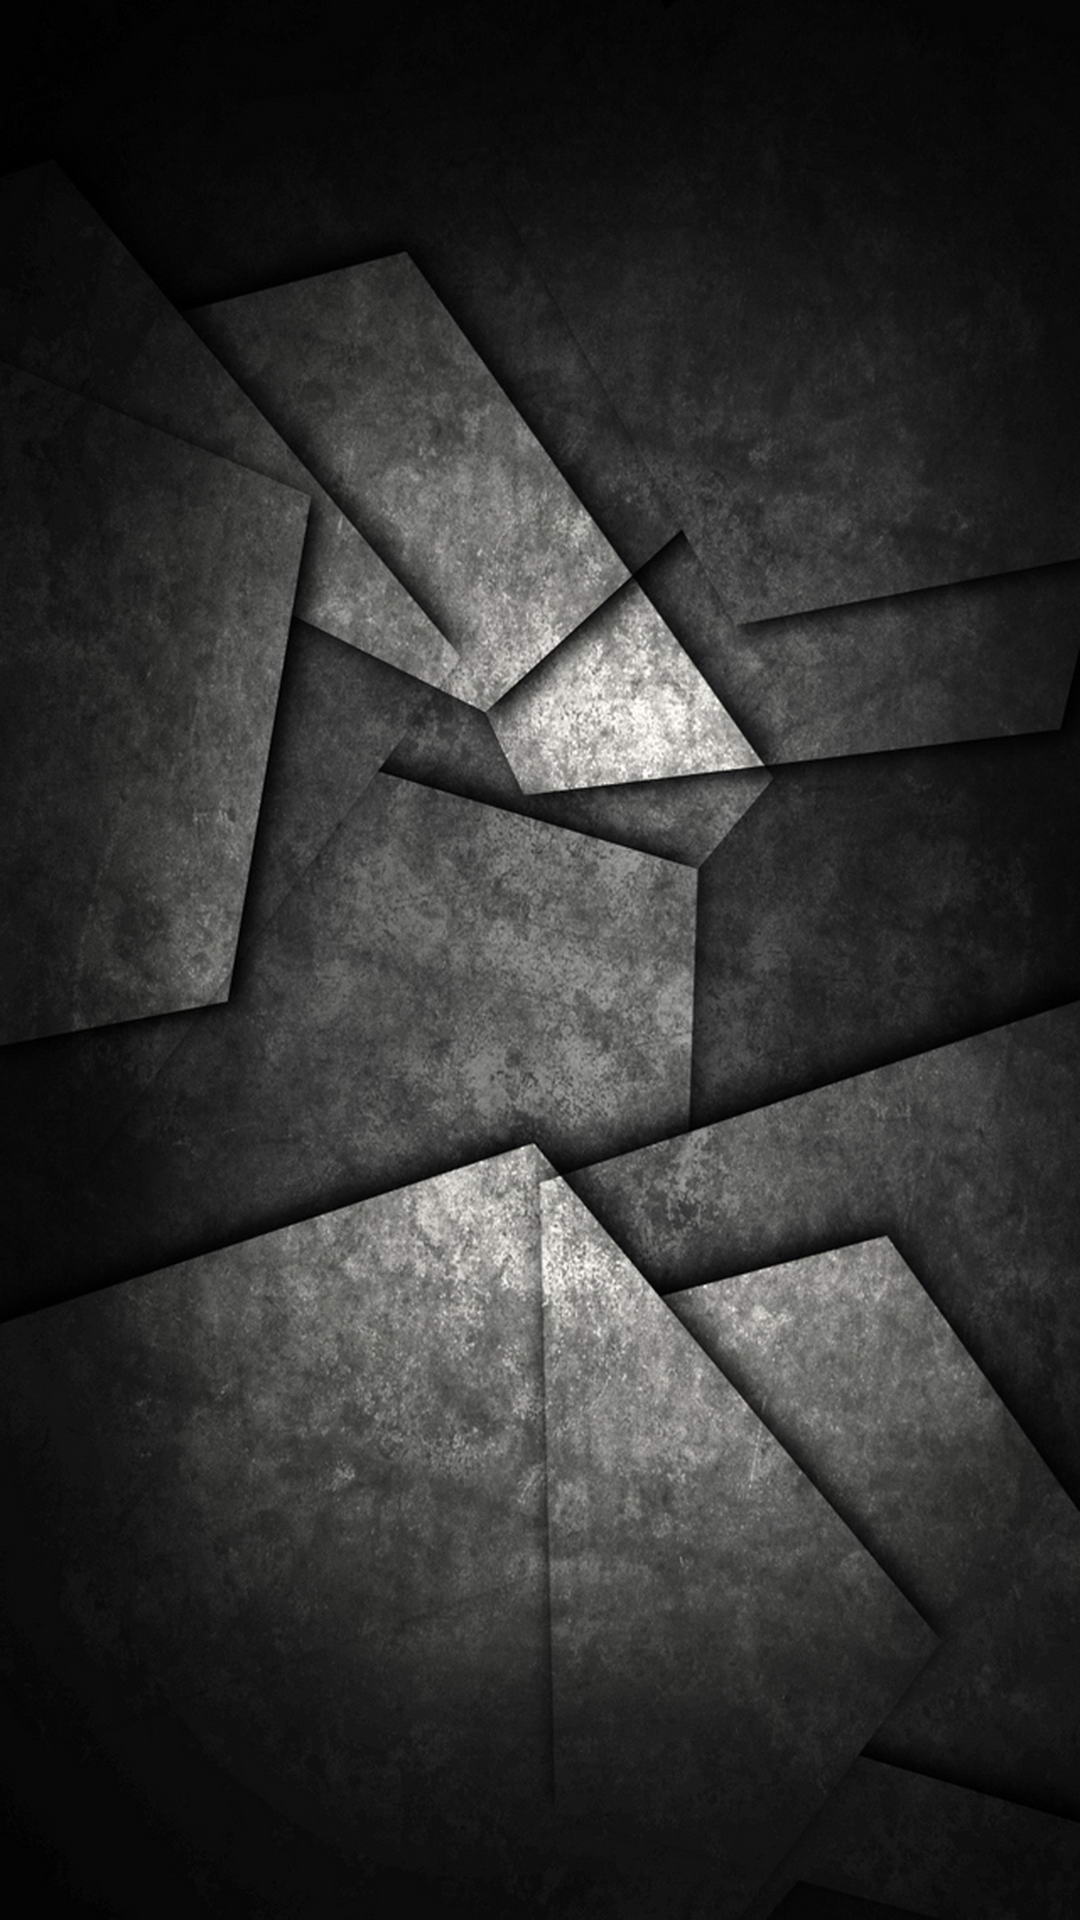 [iPhone wallpaper] black and white mosaic art | iPhone Wallpapers